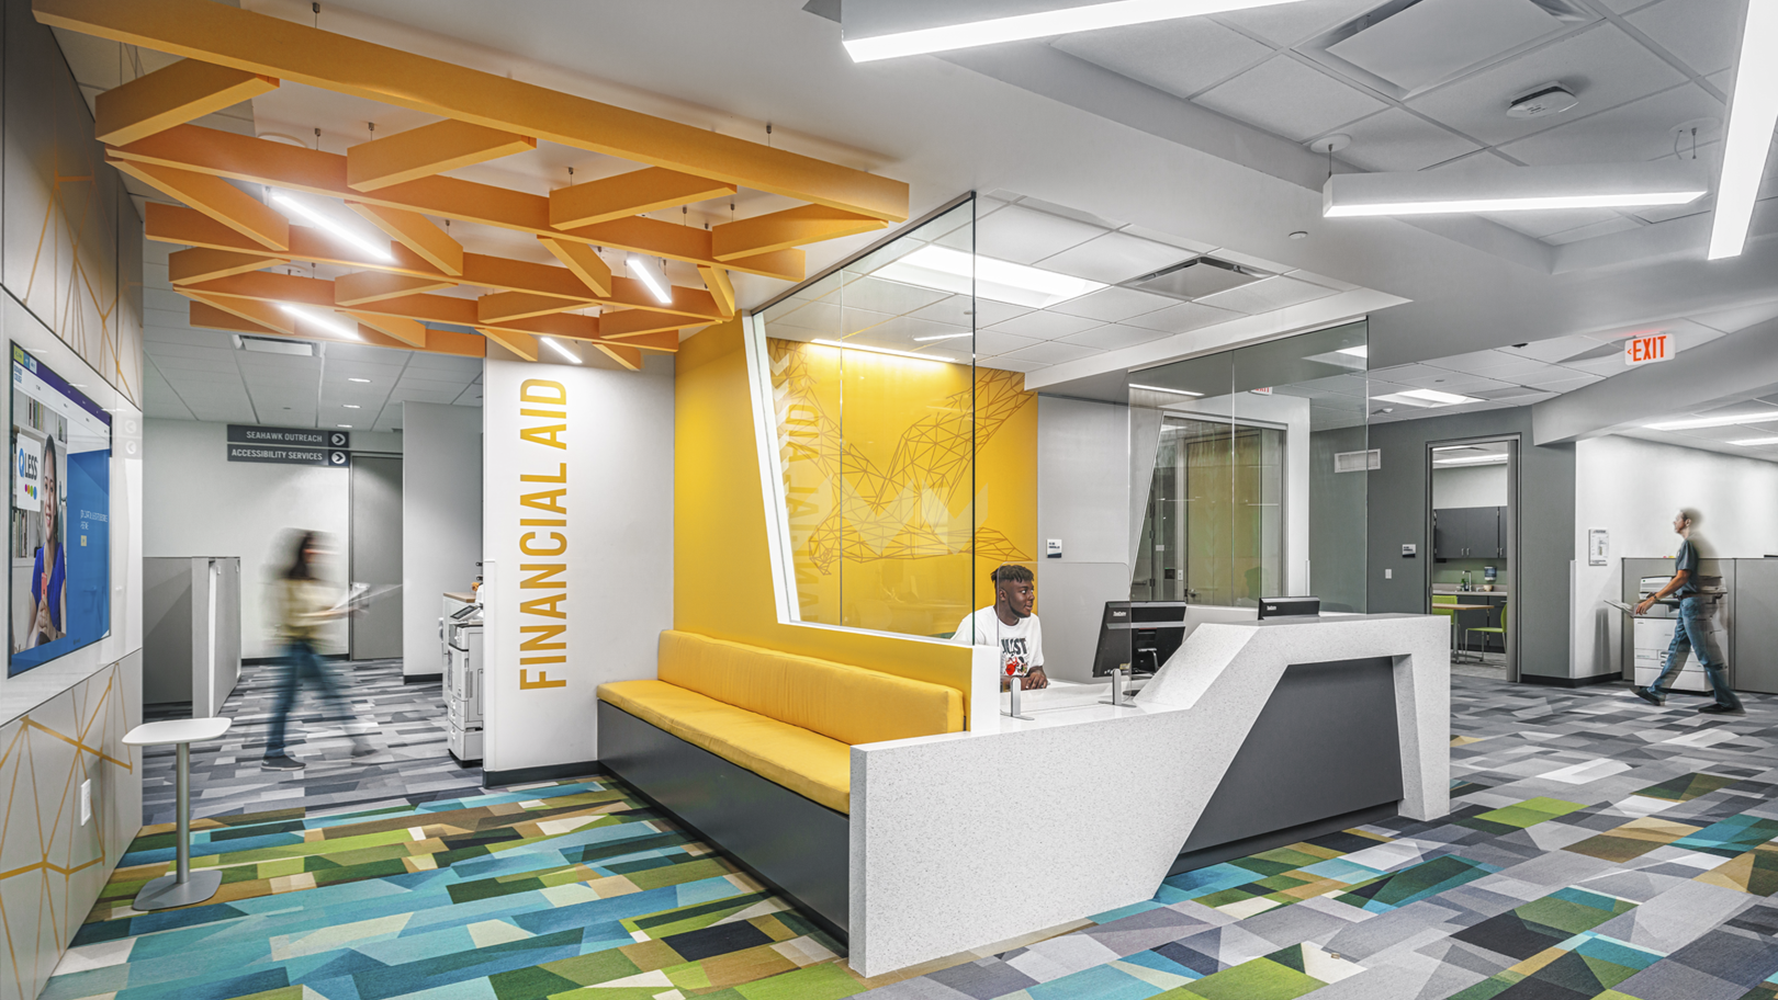 Lobby with multi colored checkered carpet with white and orange ceiling and yellow couch against white desk. Financial Aid is in yellow on white wall